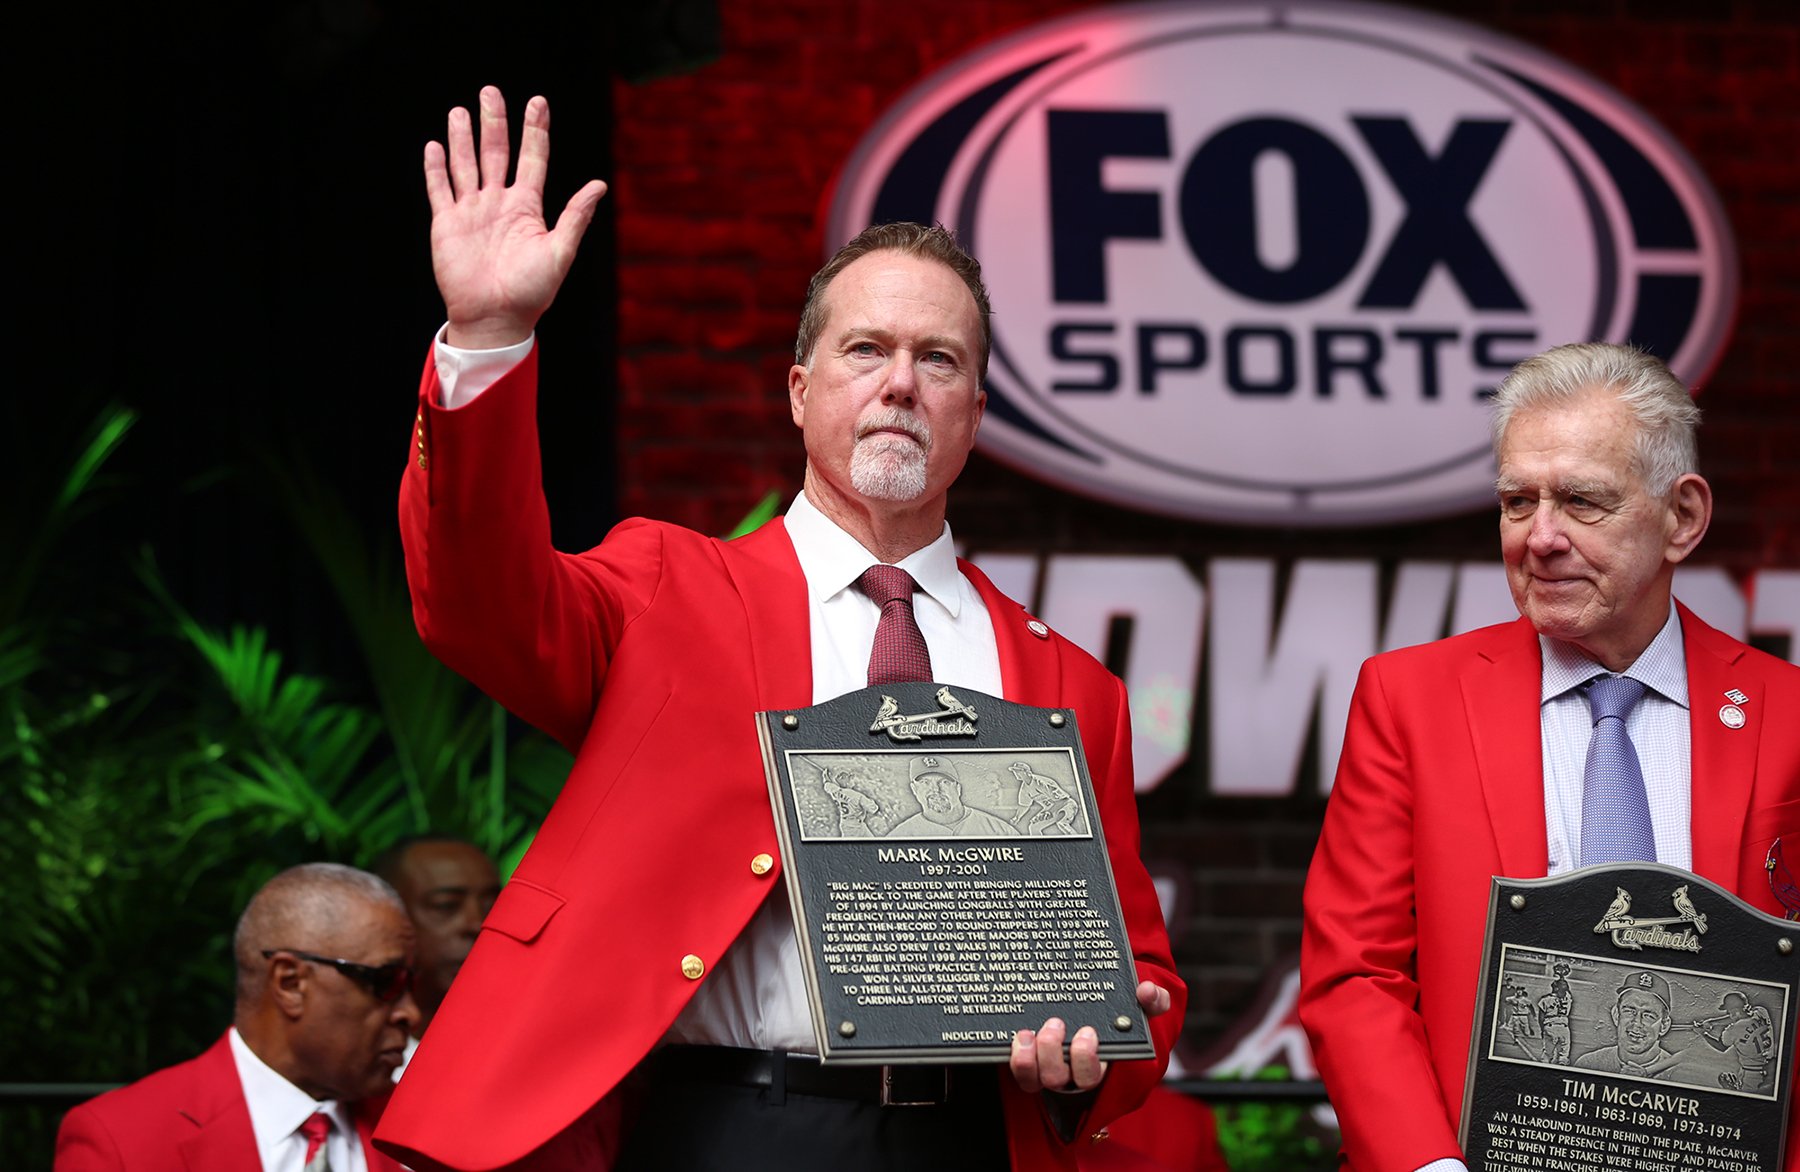 Join us in wishing a Happy 54th Birthday to Hall of Famer Mark McGwire!  